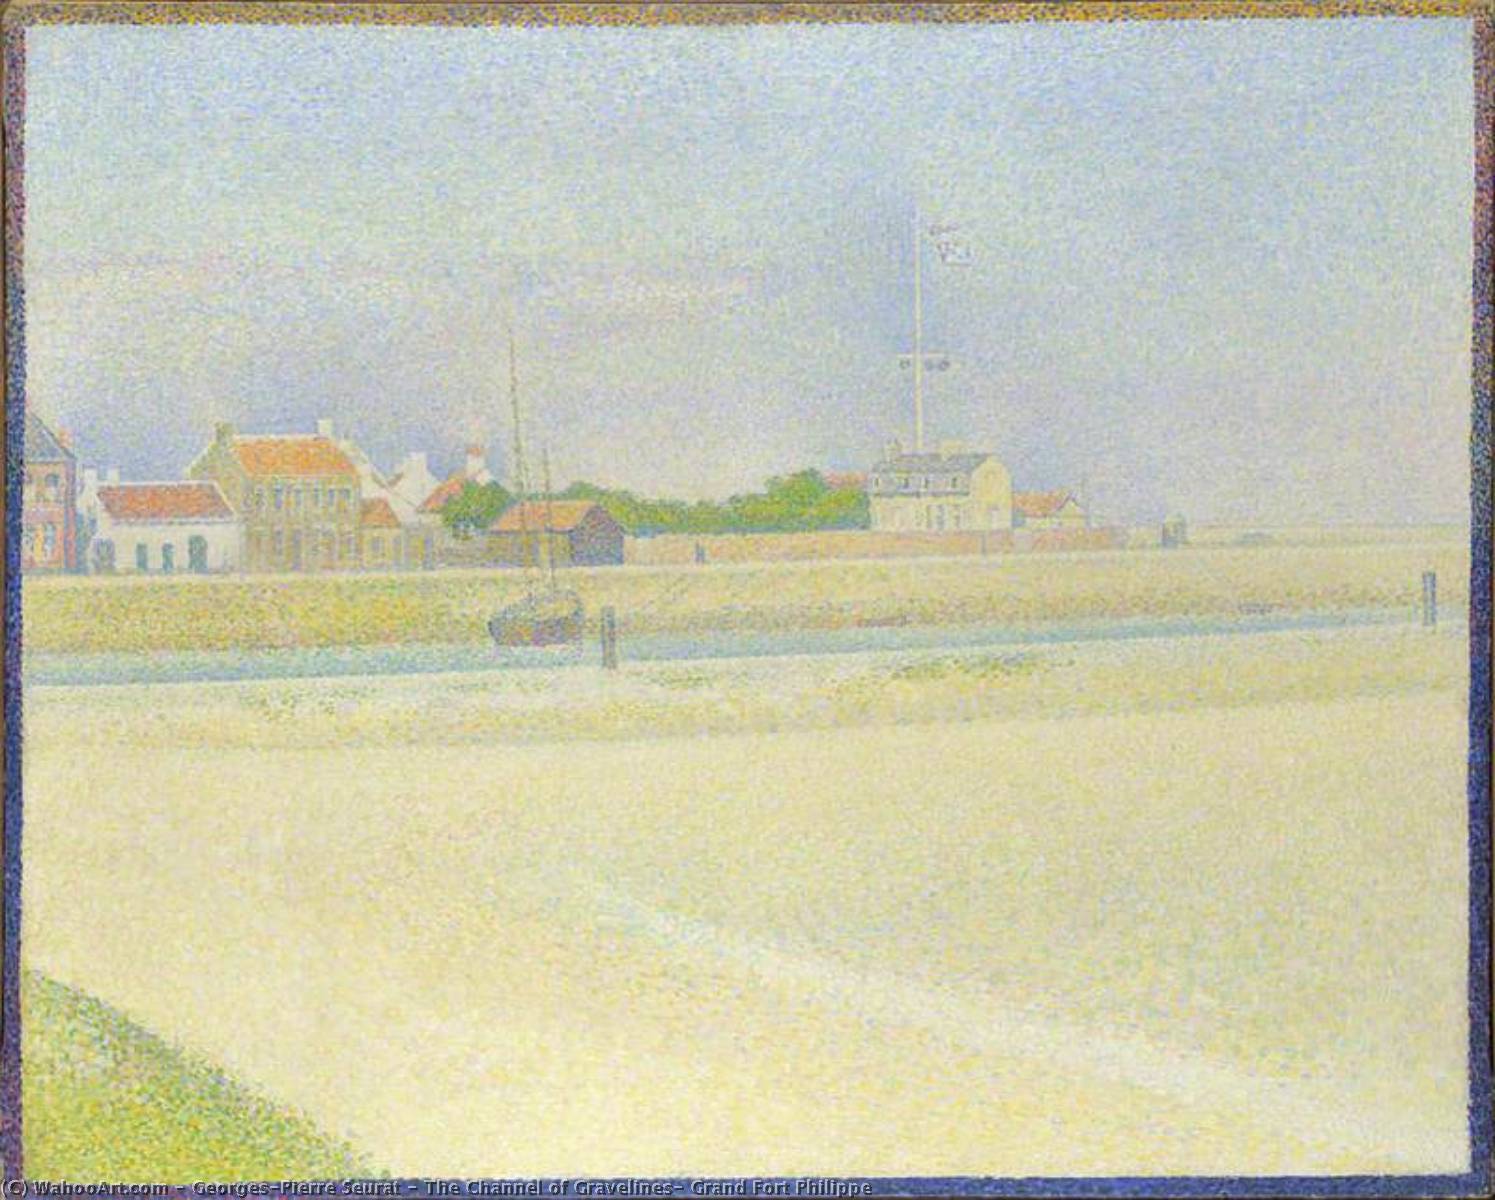 WikiOO.org - Encyclopedia of Fine Arts - Maleri, Artwork Georges Pierre Seurat - The Channel of Gravelines, Grand Fort Philippe